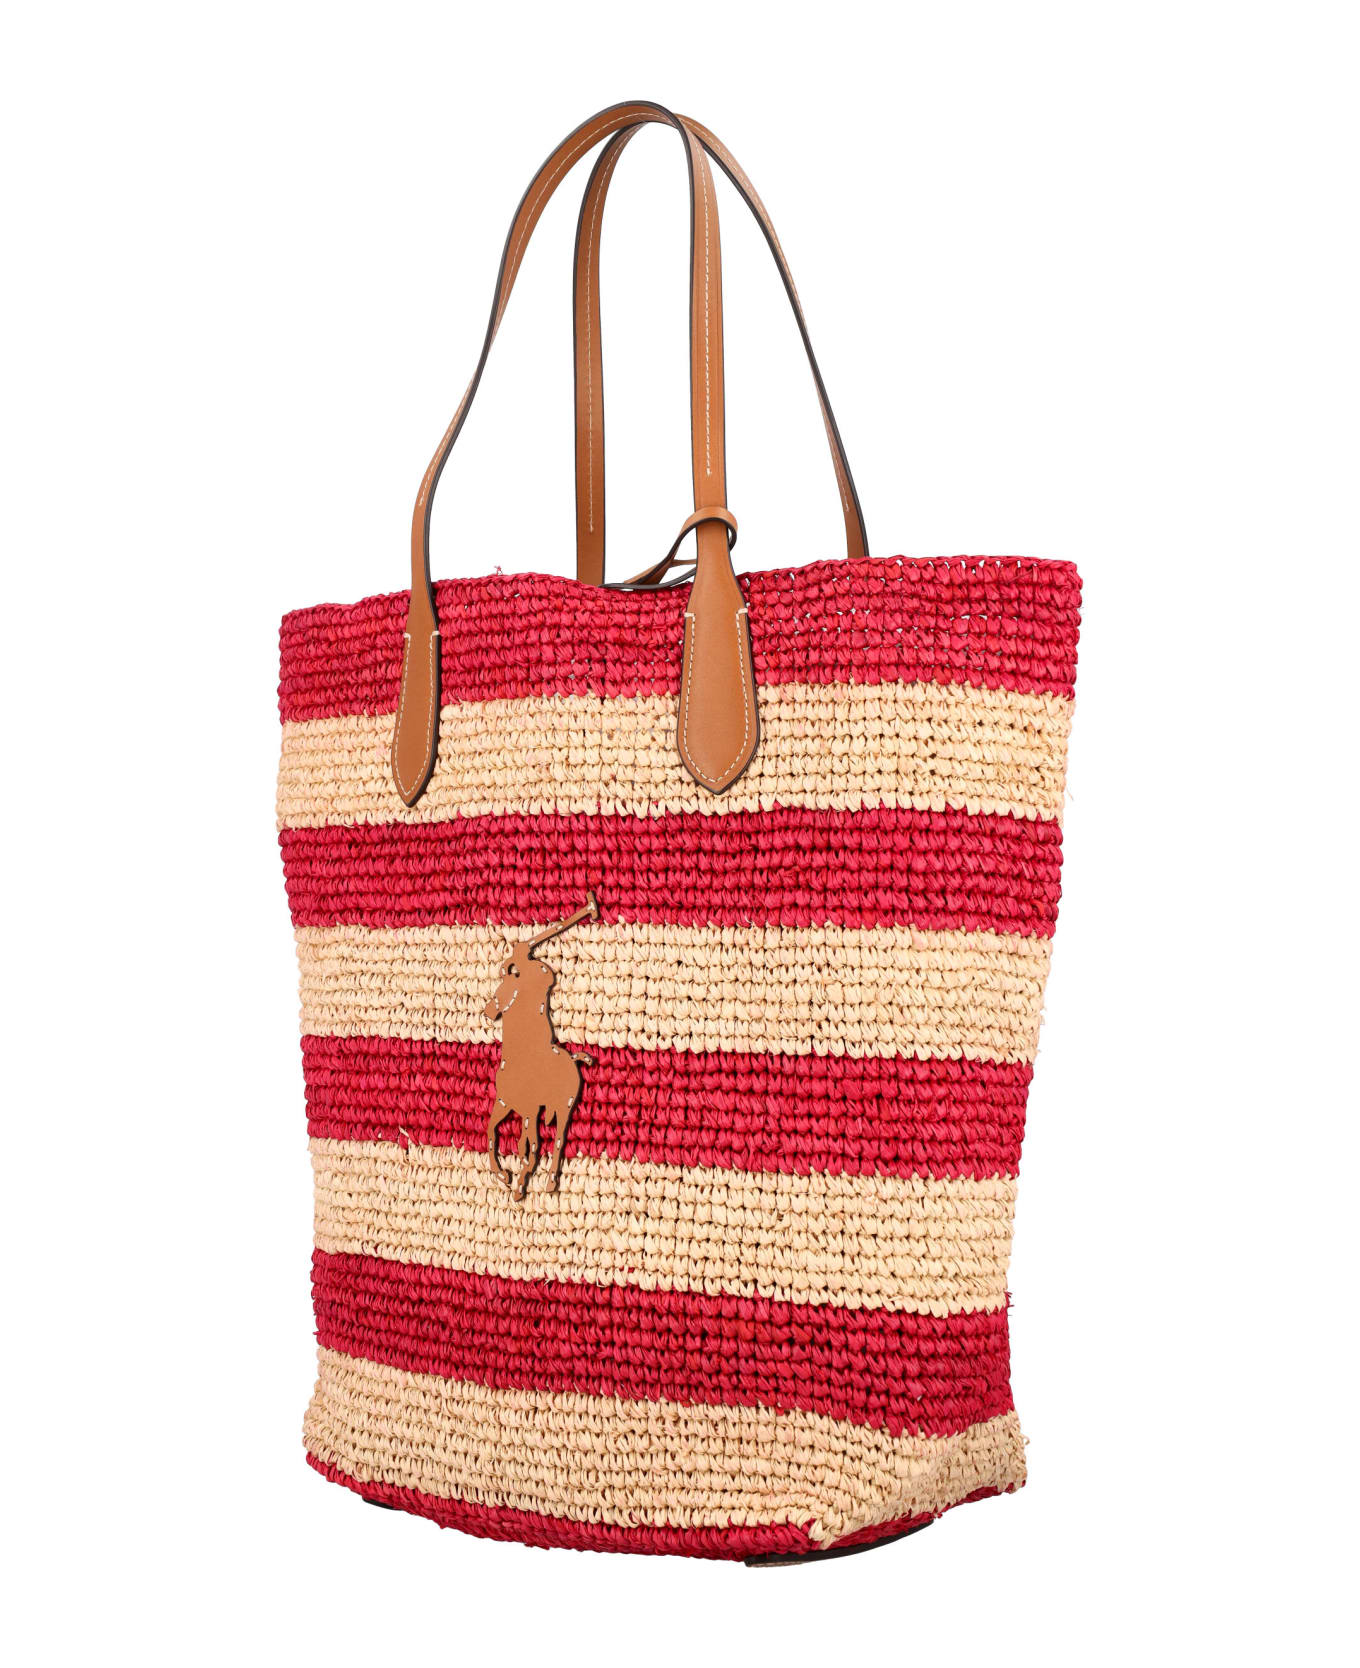 Polo Ralph Lauren Striped Straw Tote Bag - NATURAL RED トートバッグ